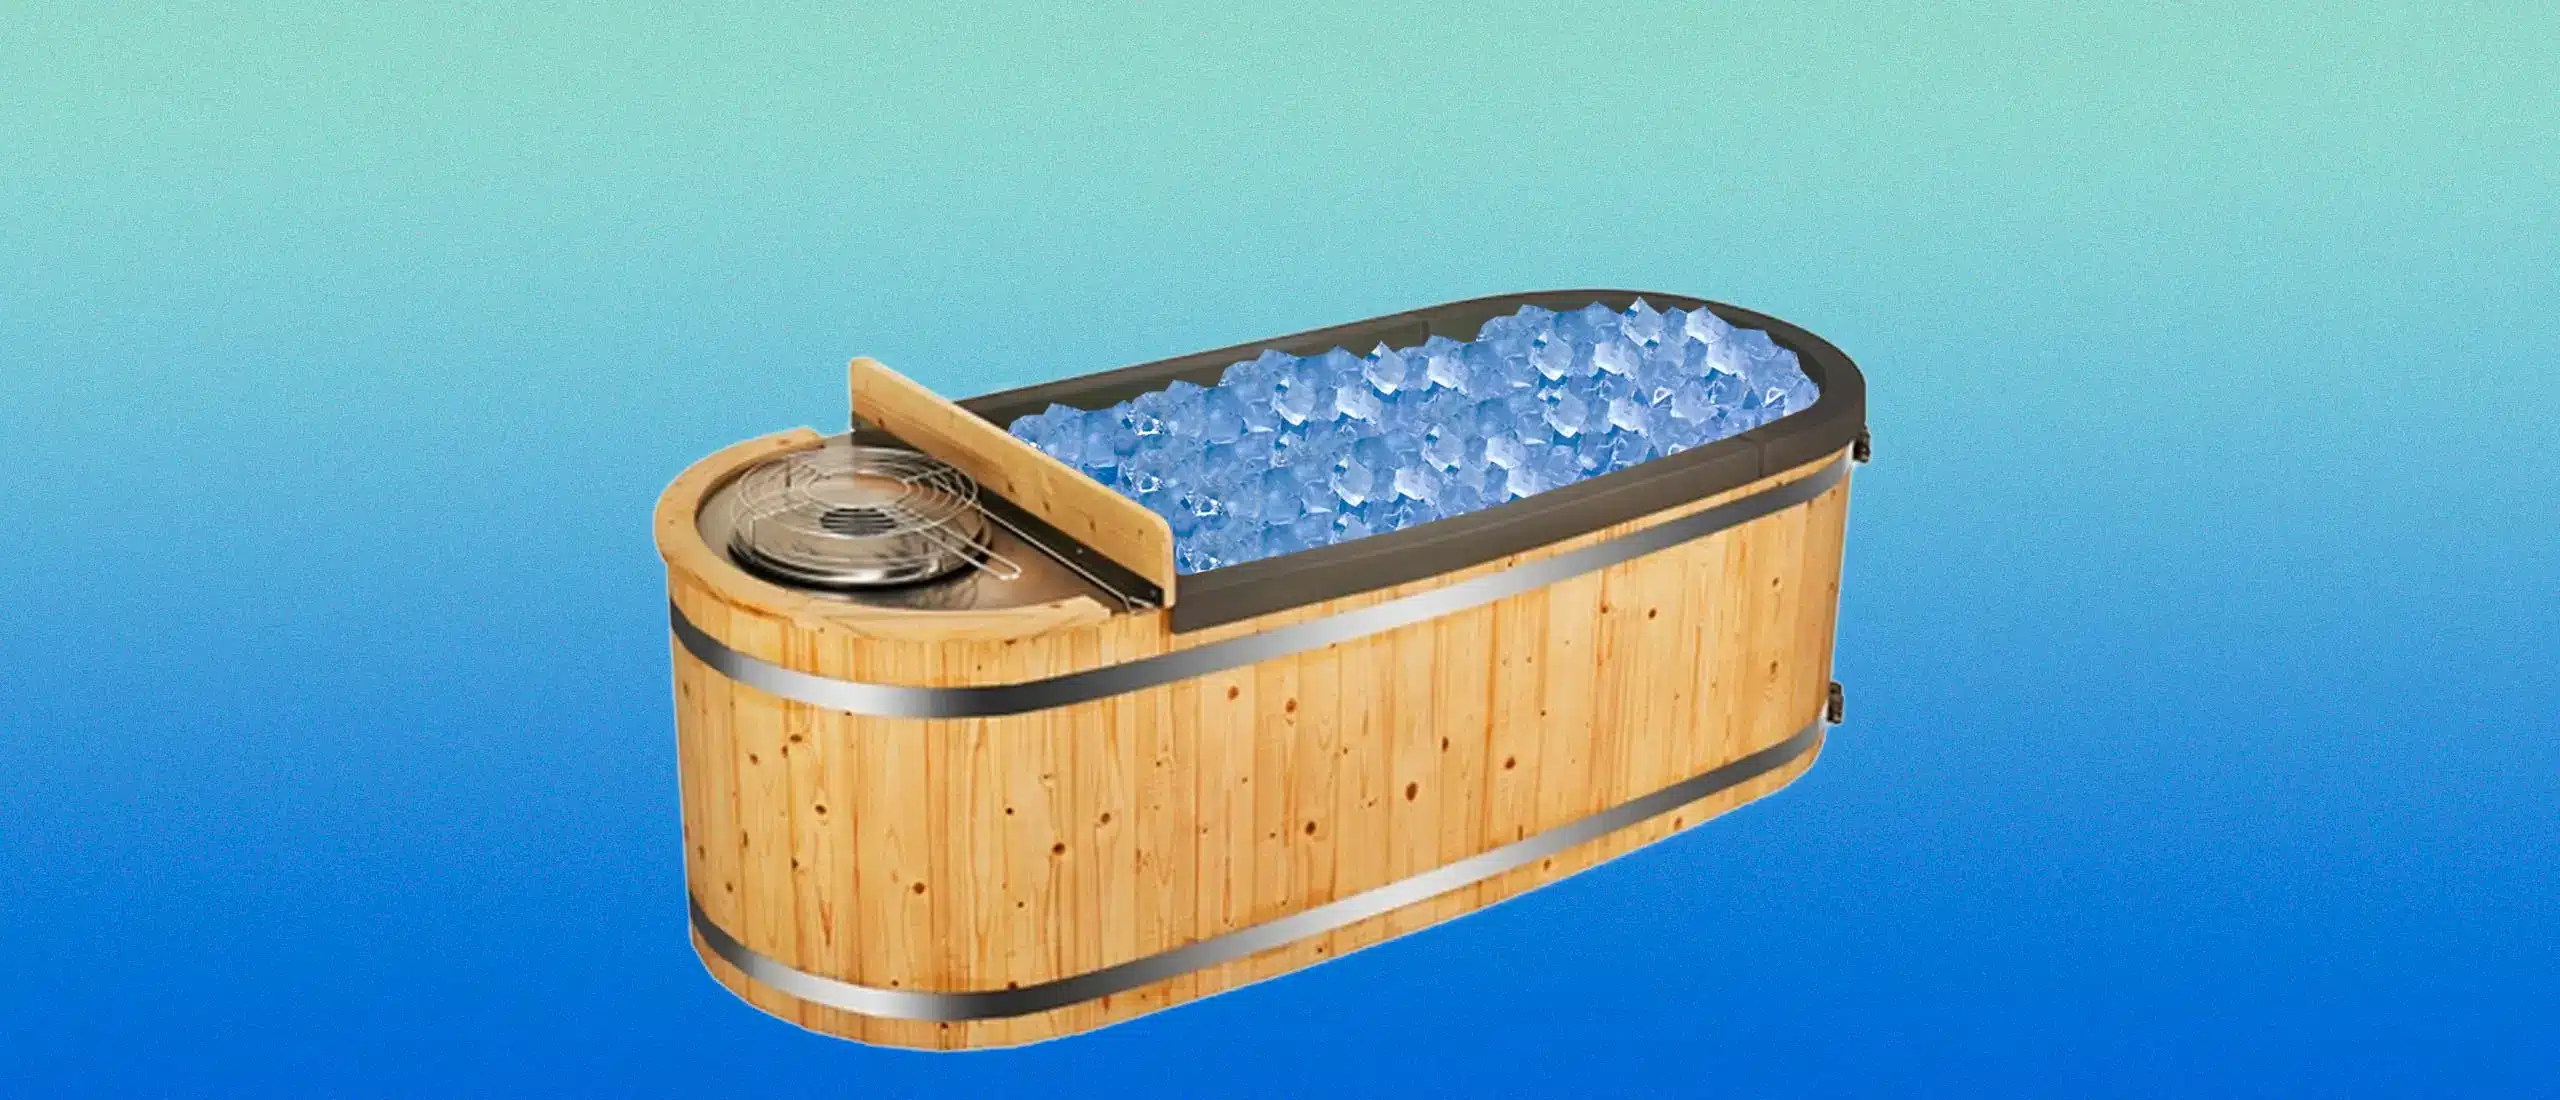 A product shot of a wooden ice bath with ice cubes inside.